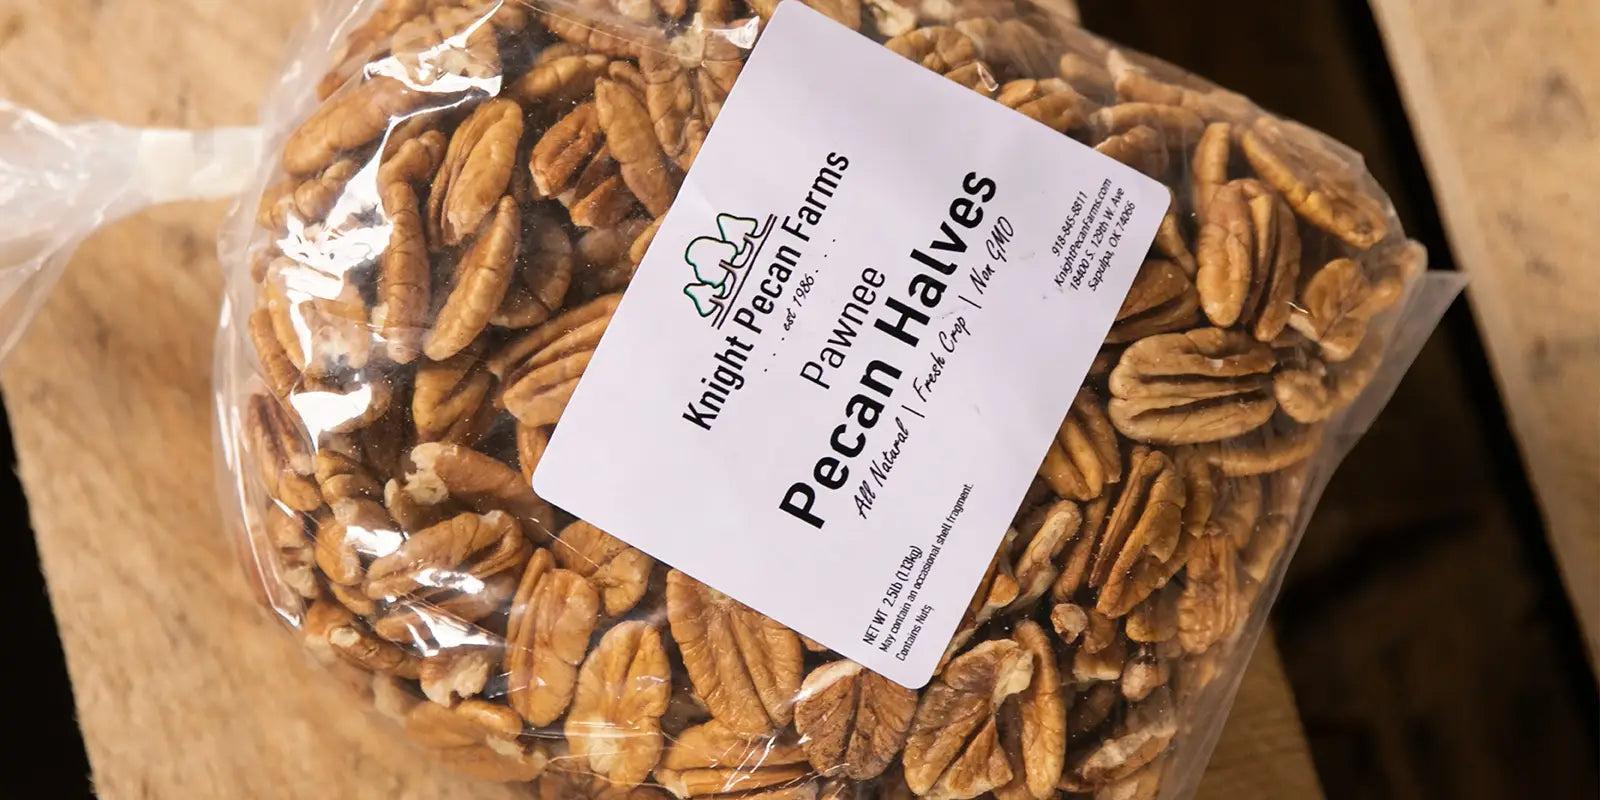 Bag of Pawnee Pecan Halves from Knight Pecan Farms on a wooden table